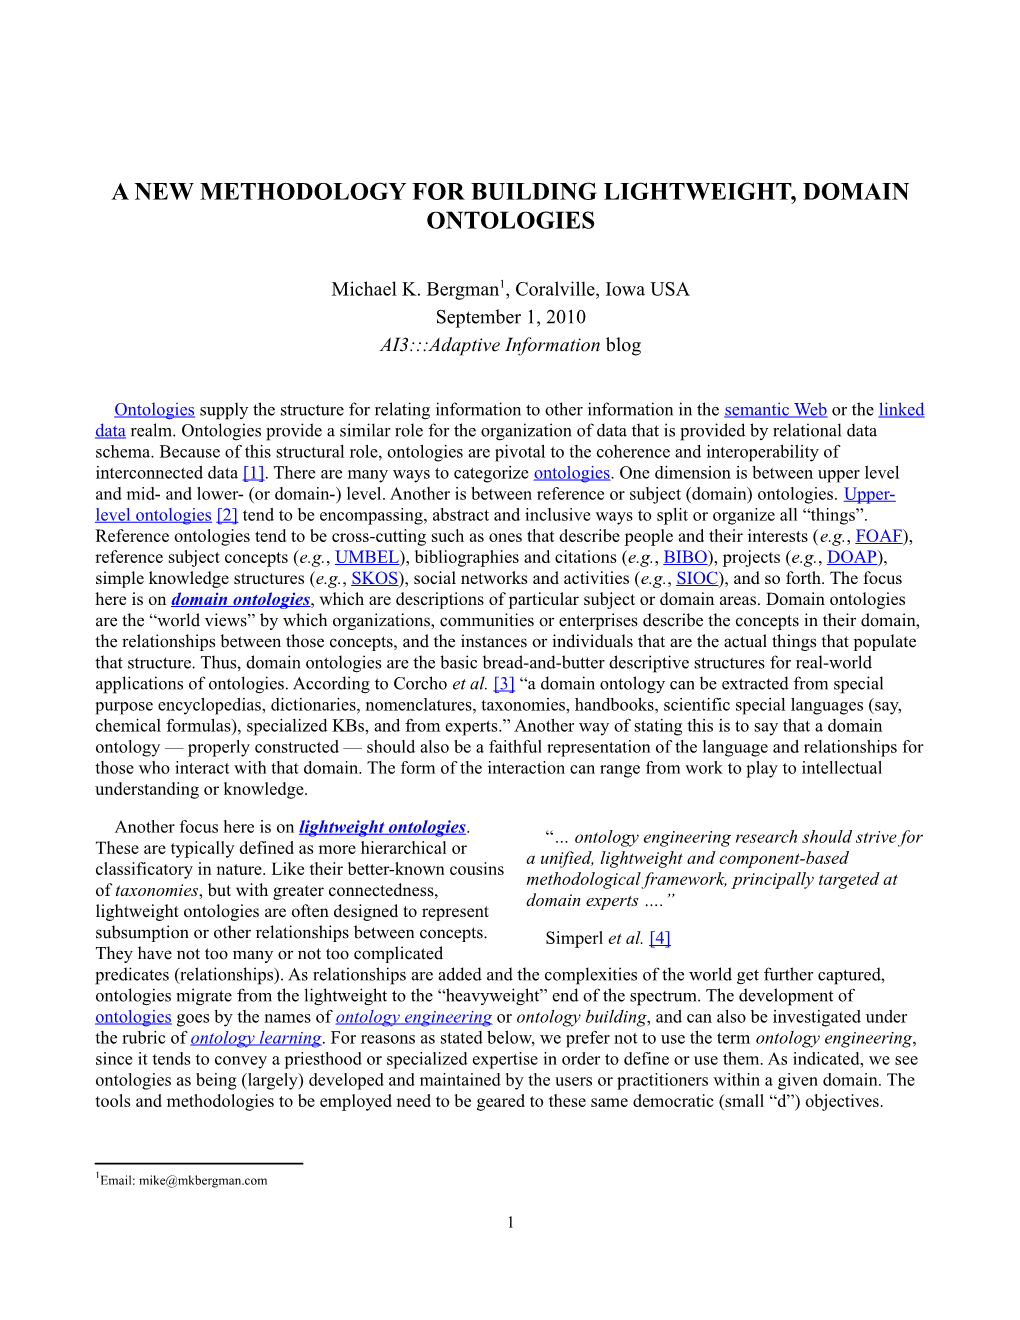 A New Methodology for Building Lightweight, Domain Ontologies